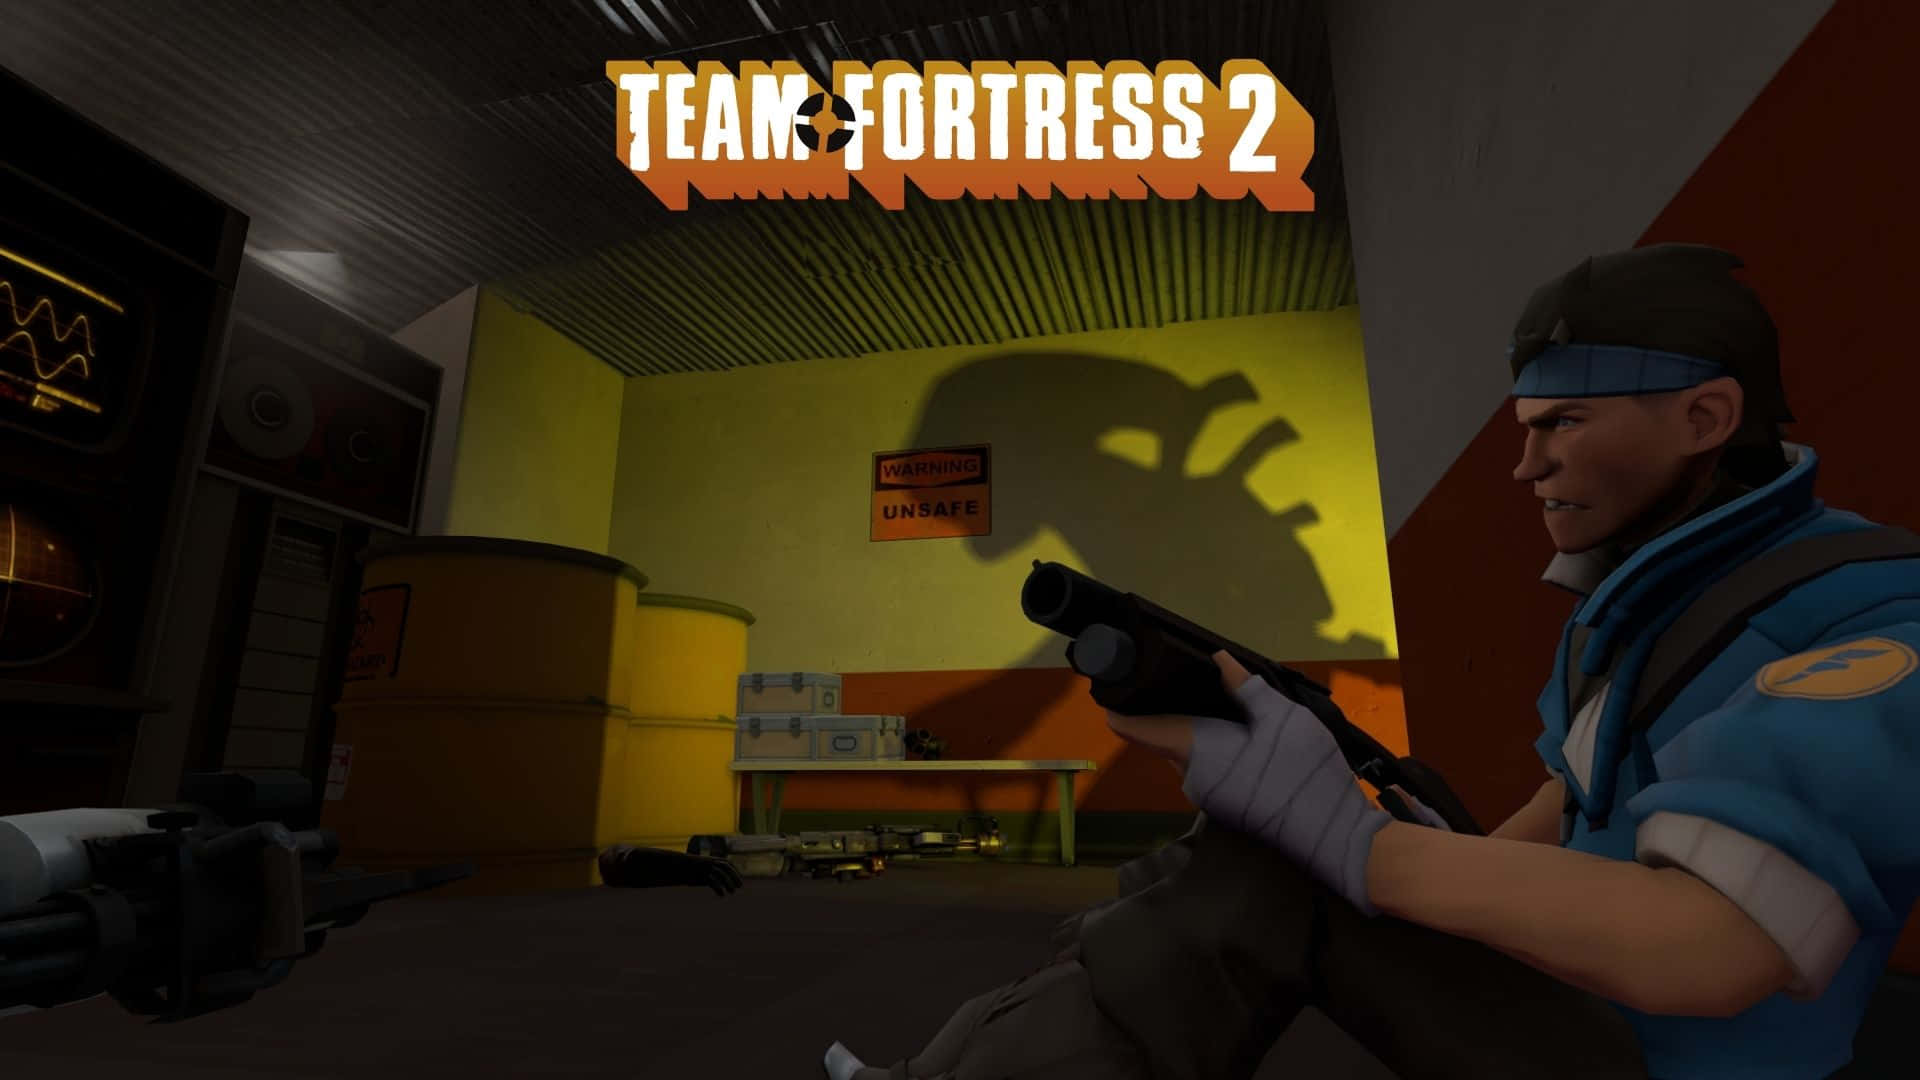 Two characters battle it out in the online game - Team Fortress 2